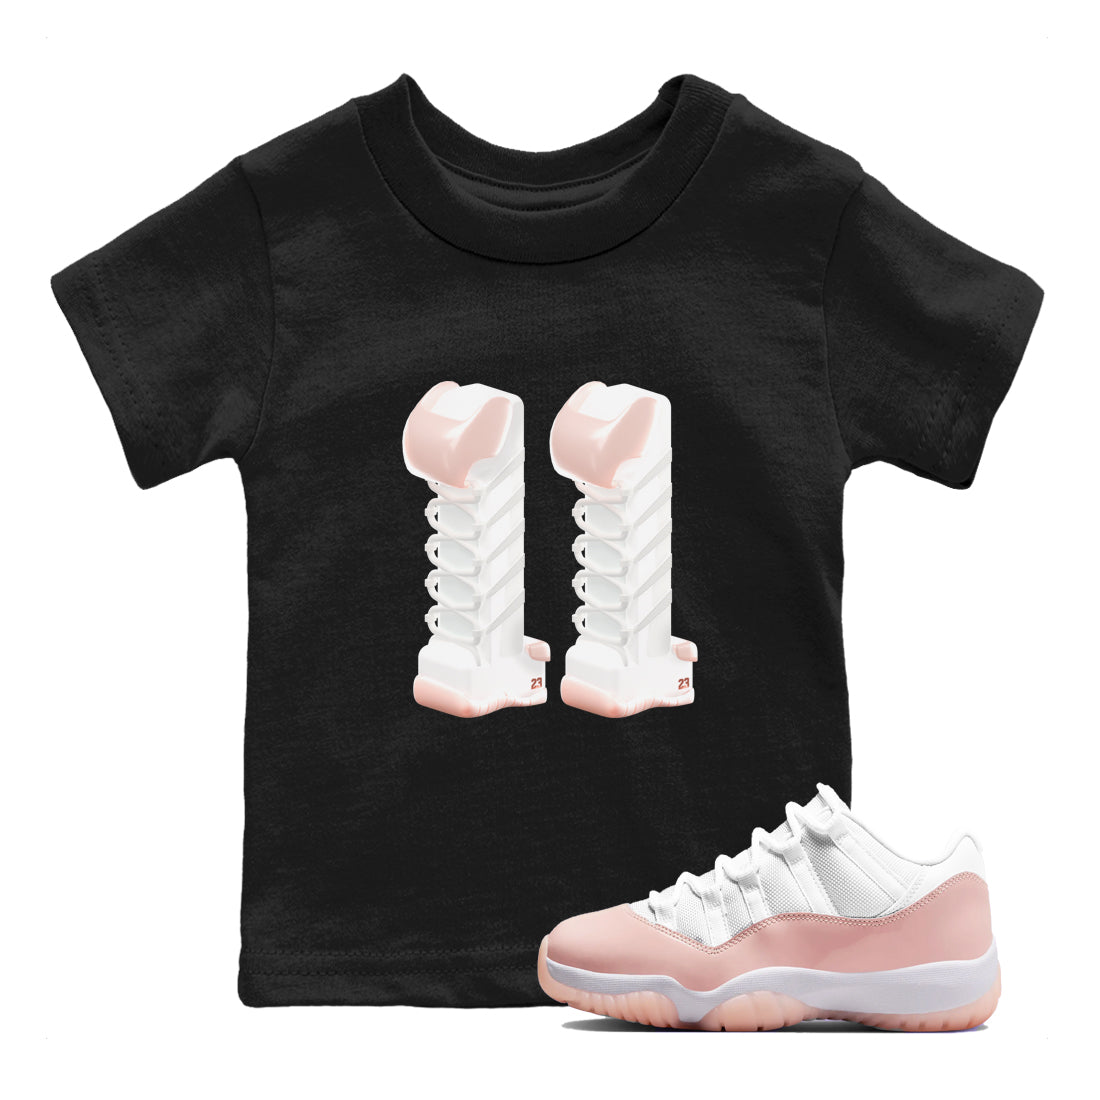 11s Legend Pink shirts to match jordans 3D Number 11 sneaker match tees Air Jordan 11 Legend Pink SNRT Sneaker Tees streetwear brand Baby and Youth Black 1 cotton tee